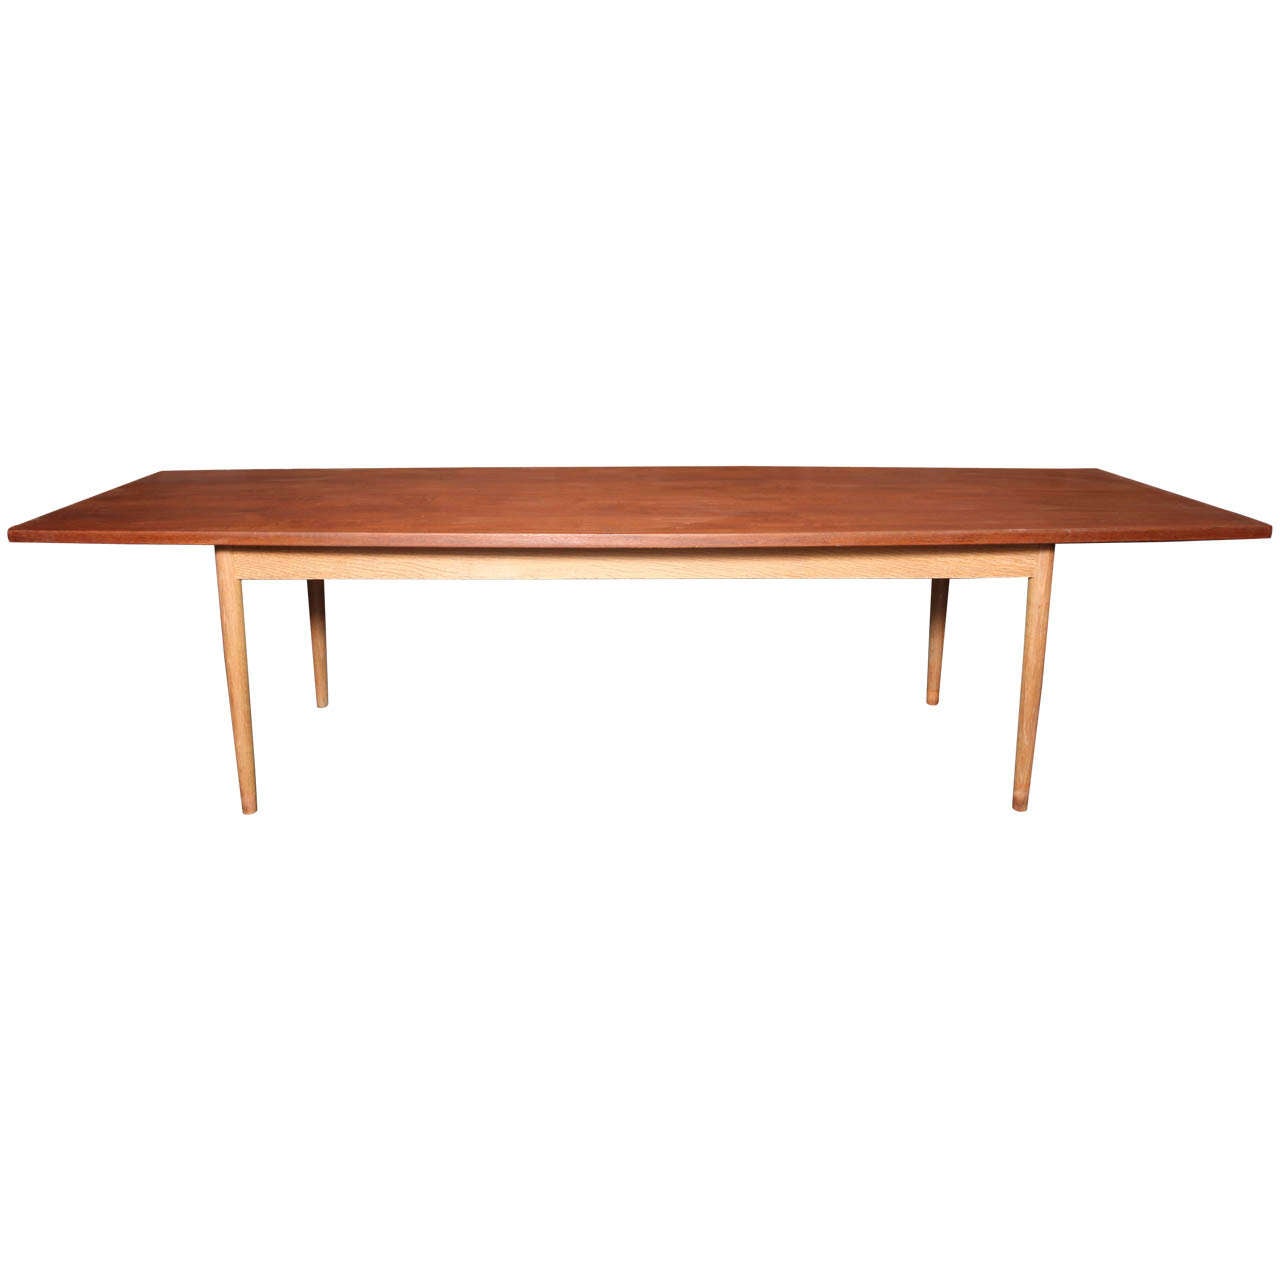 Danish Modern Teak Dining Conference Table with Oak Legs